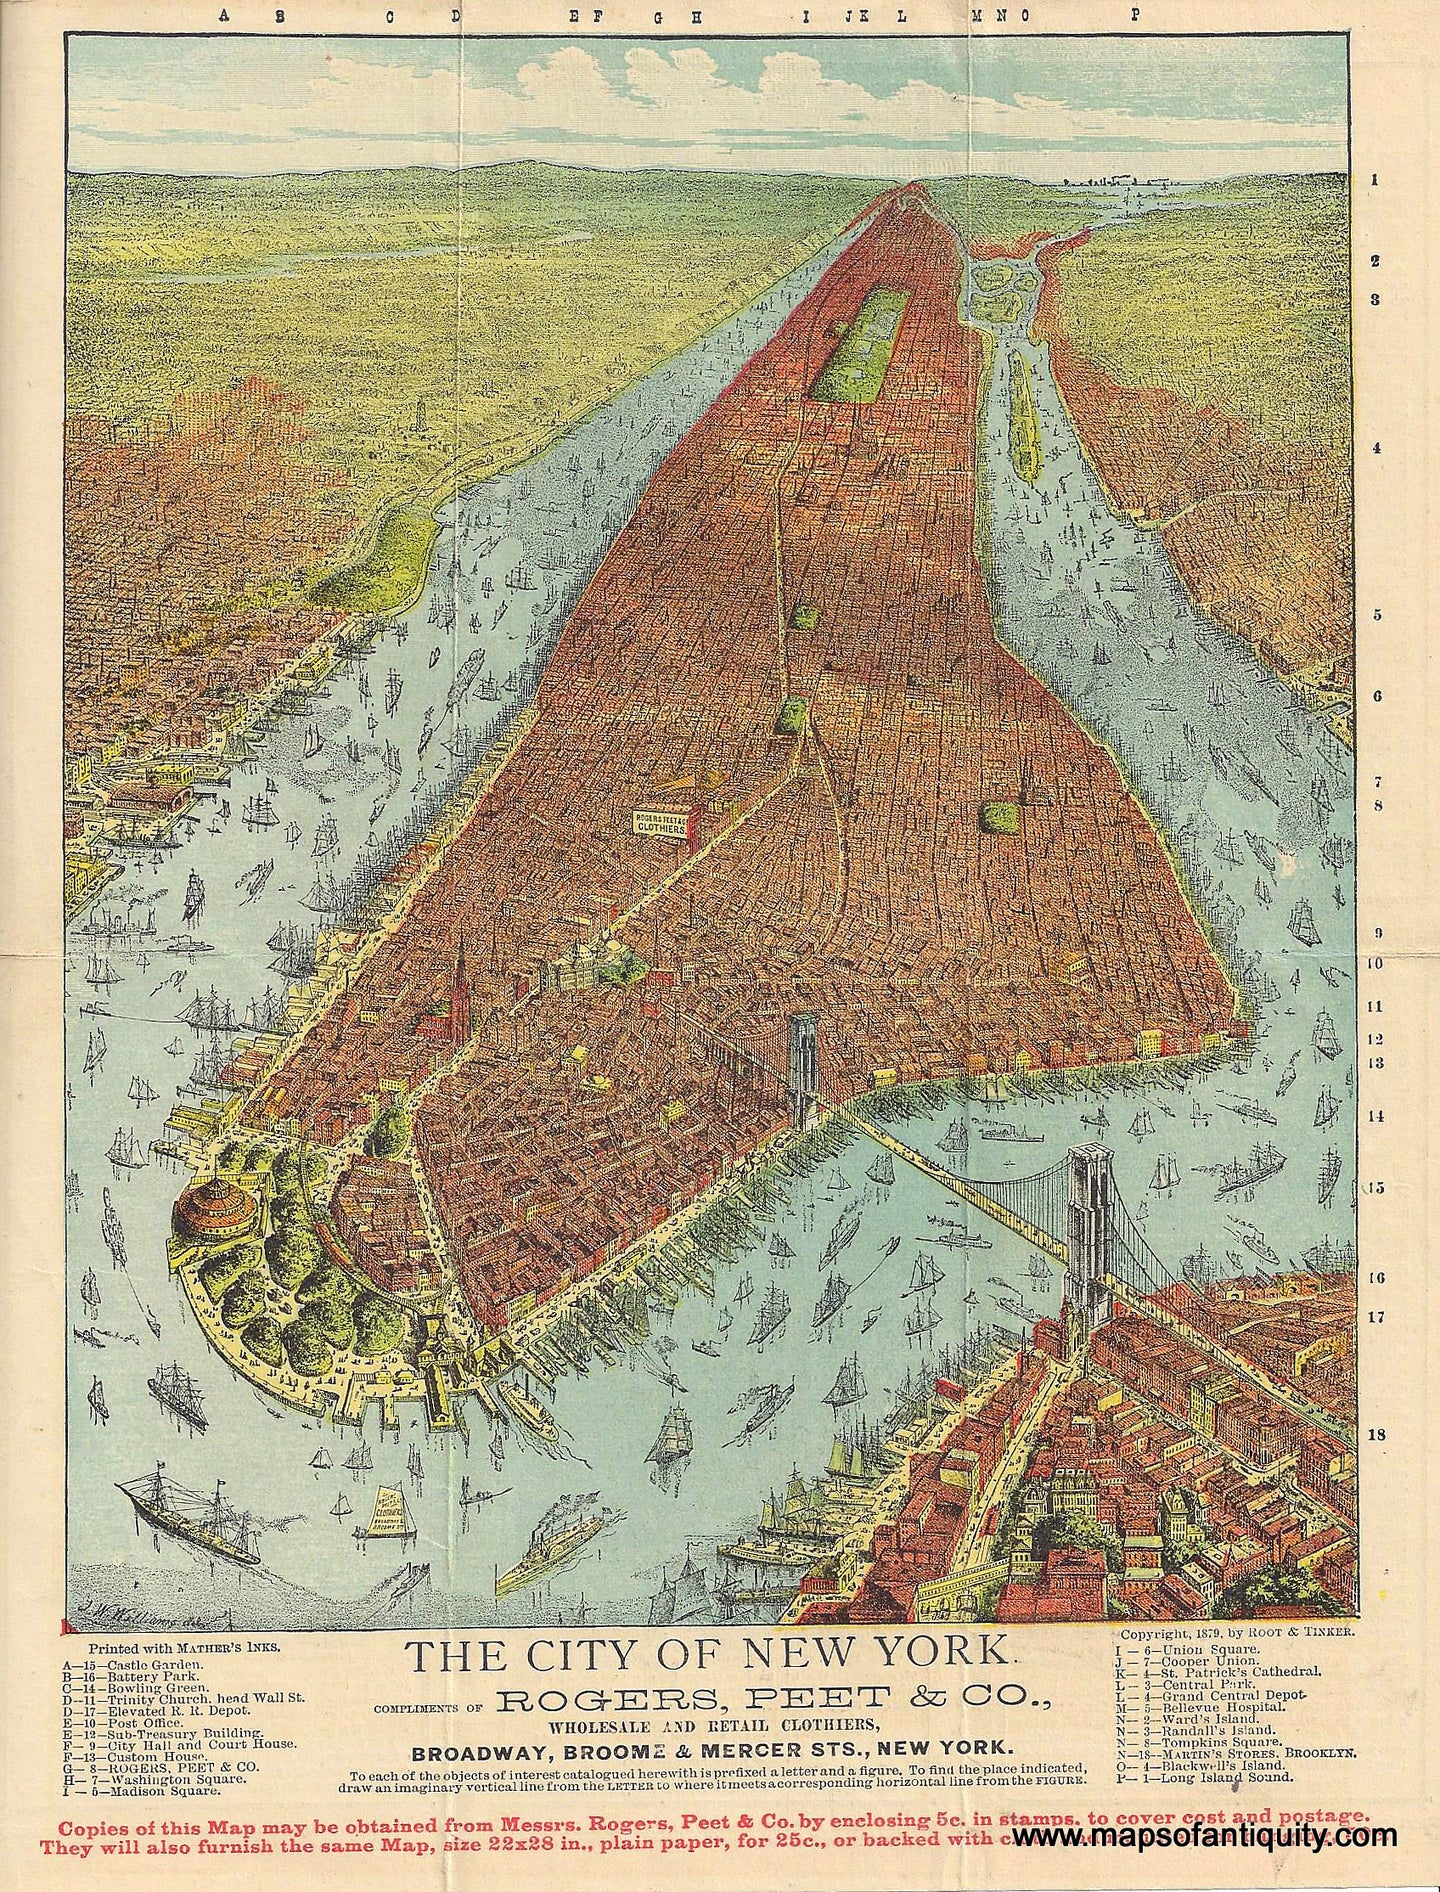 Antique bird's-eye view map of Manhattan from the southern end looking north. Includes bits of Brooklyn, Jersey City, and Queens. The rivers are crowded with ships and the Brooklyn Bridge is prominent. Bright original color, mostly red for the roofs of buildings, green for parks and rural areas farther away from the city, and blue water.